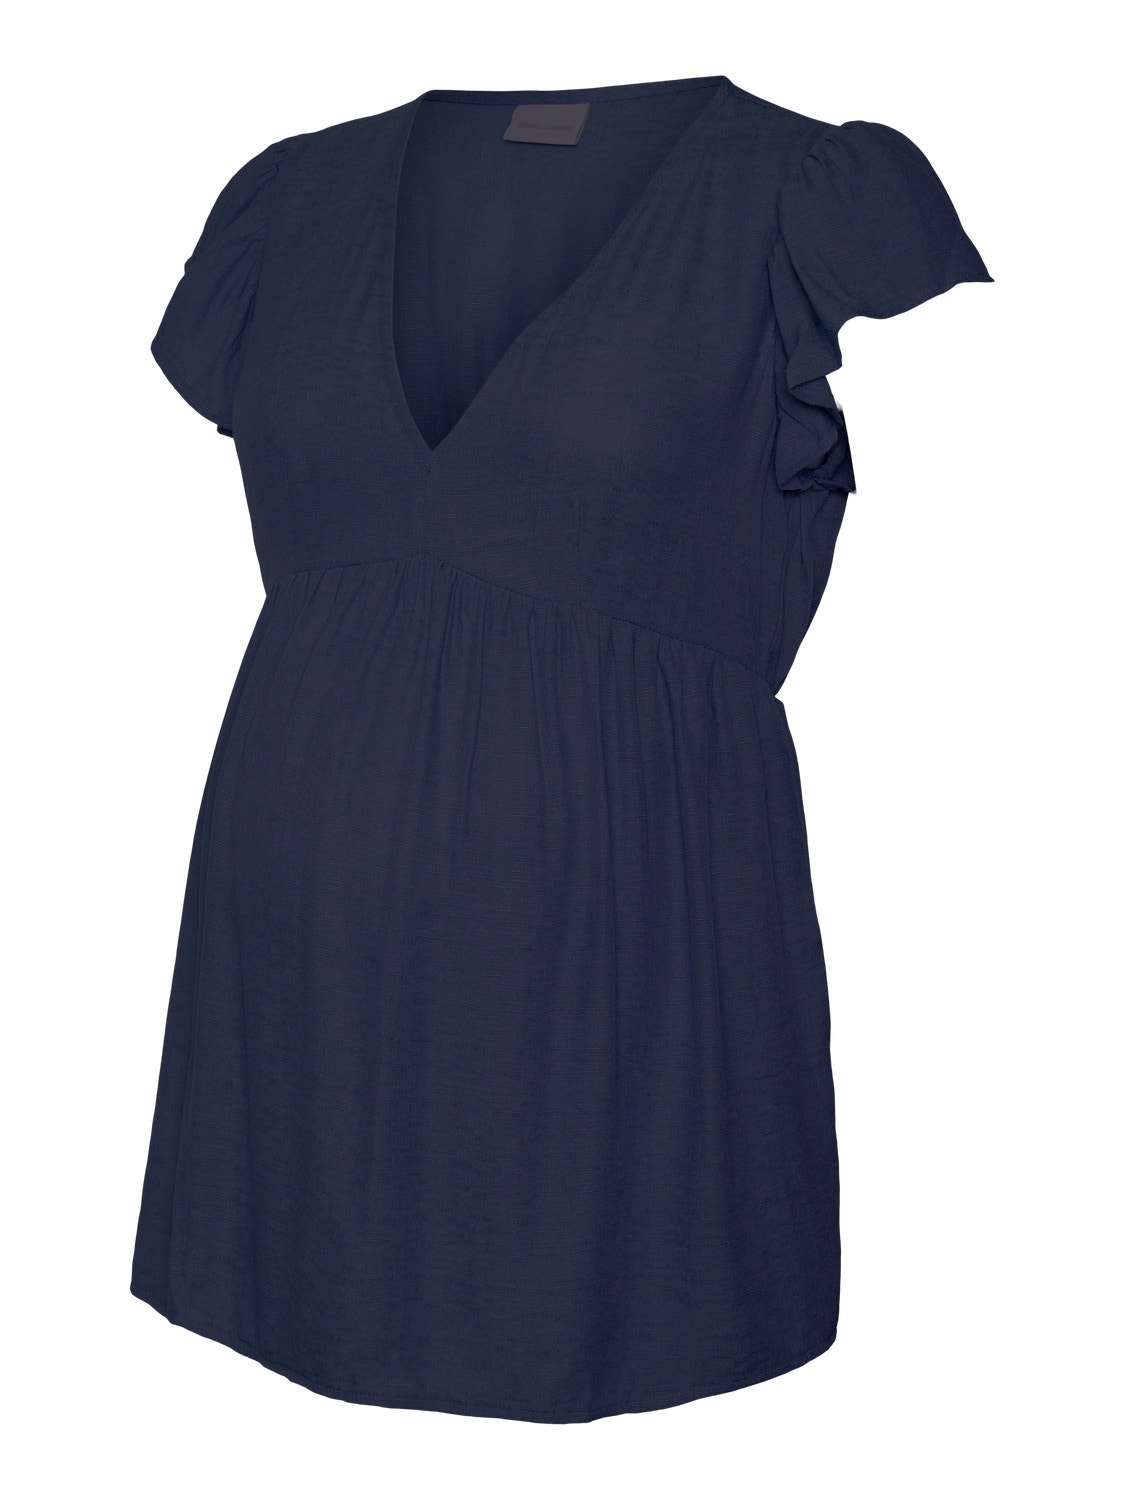 MAMA.LICIOUS Umstands-top -Medieval Blue - 20020373